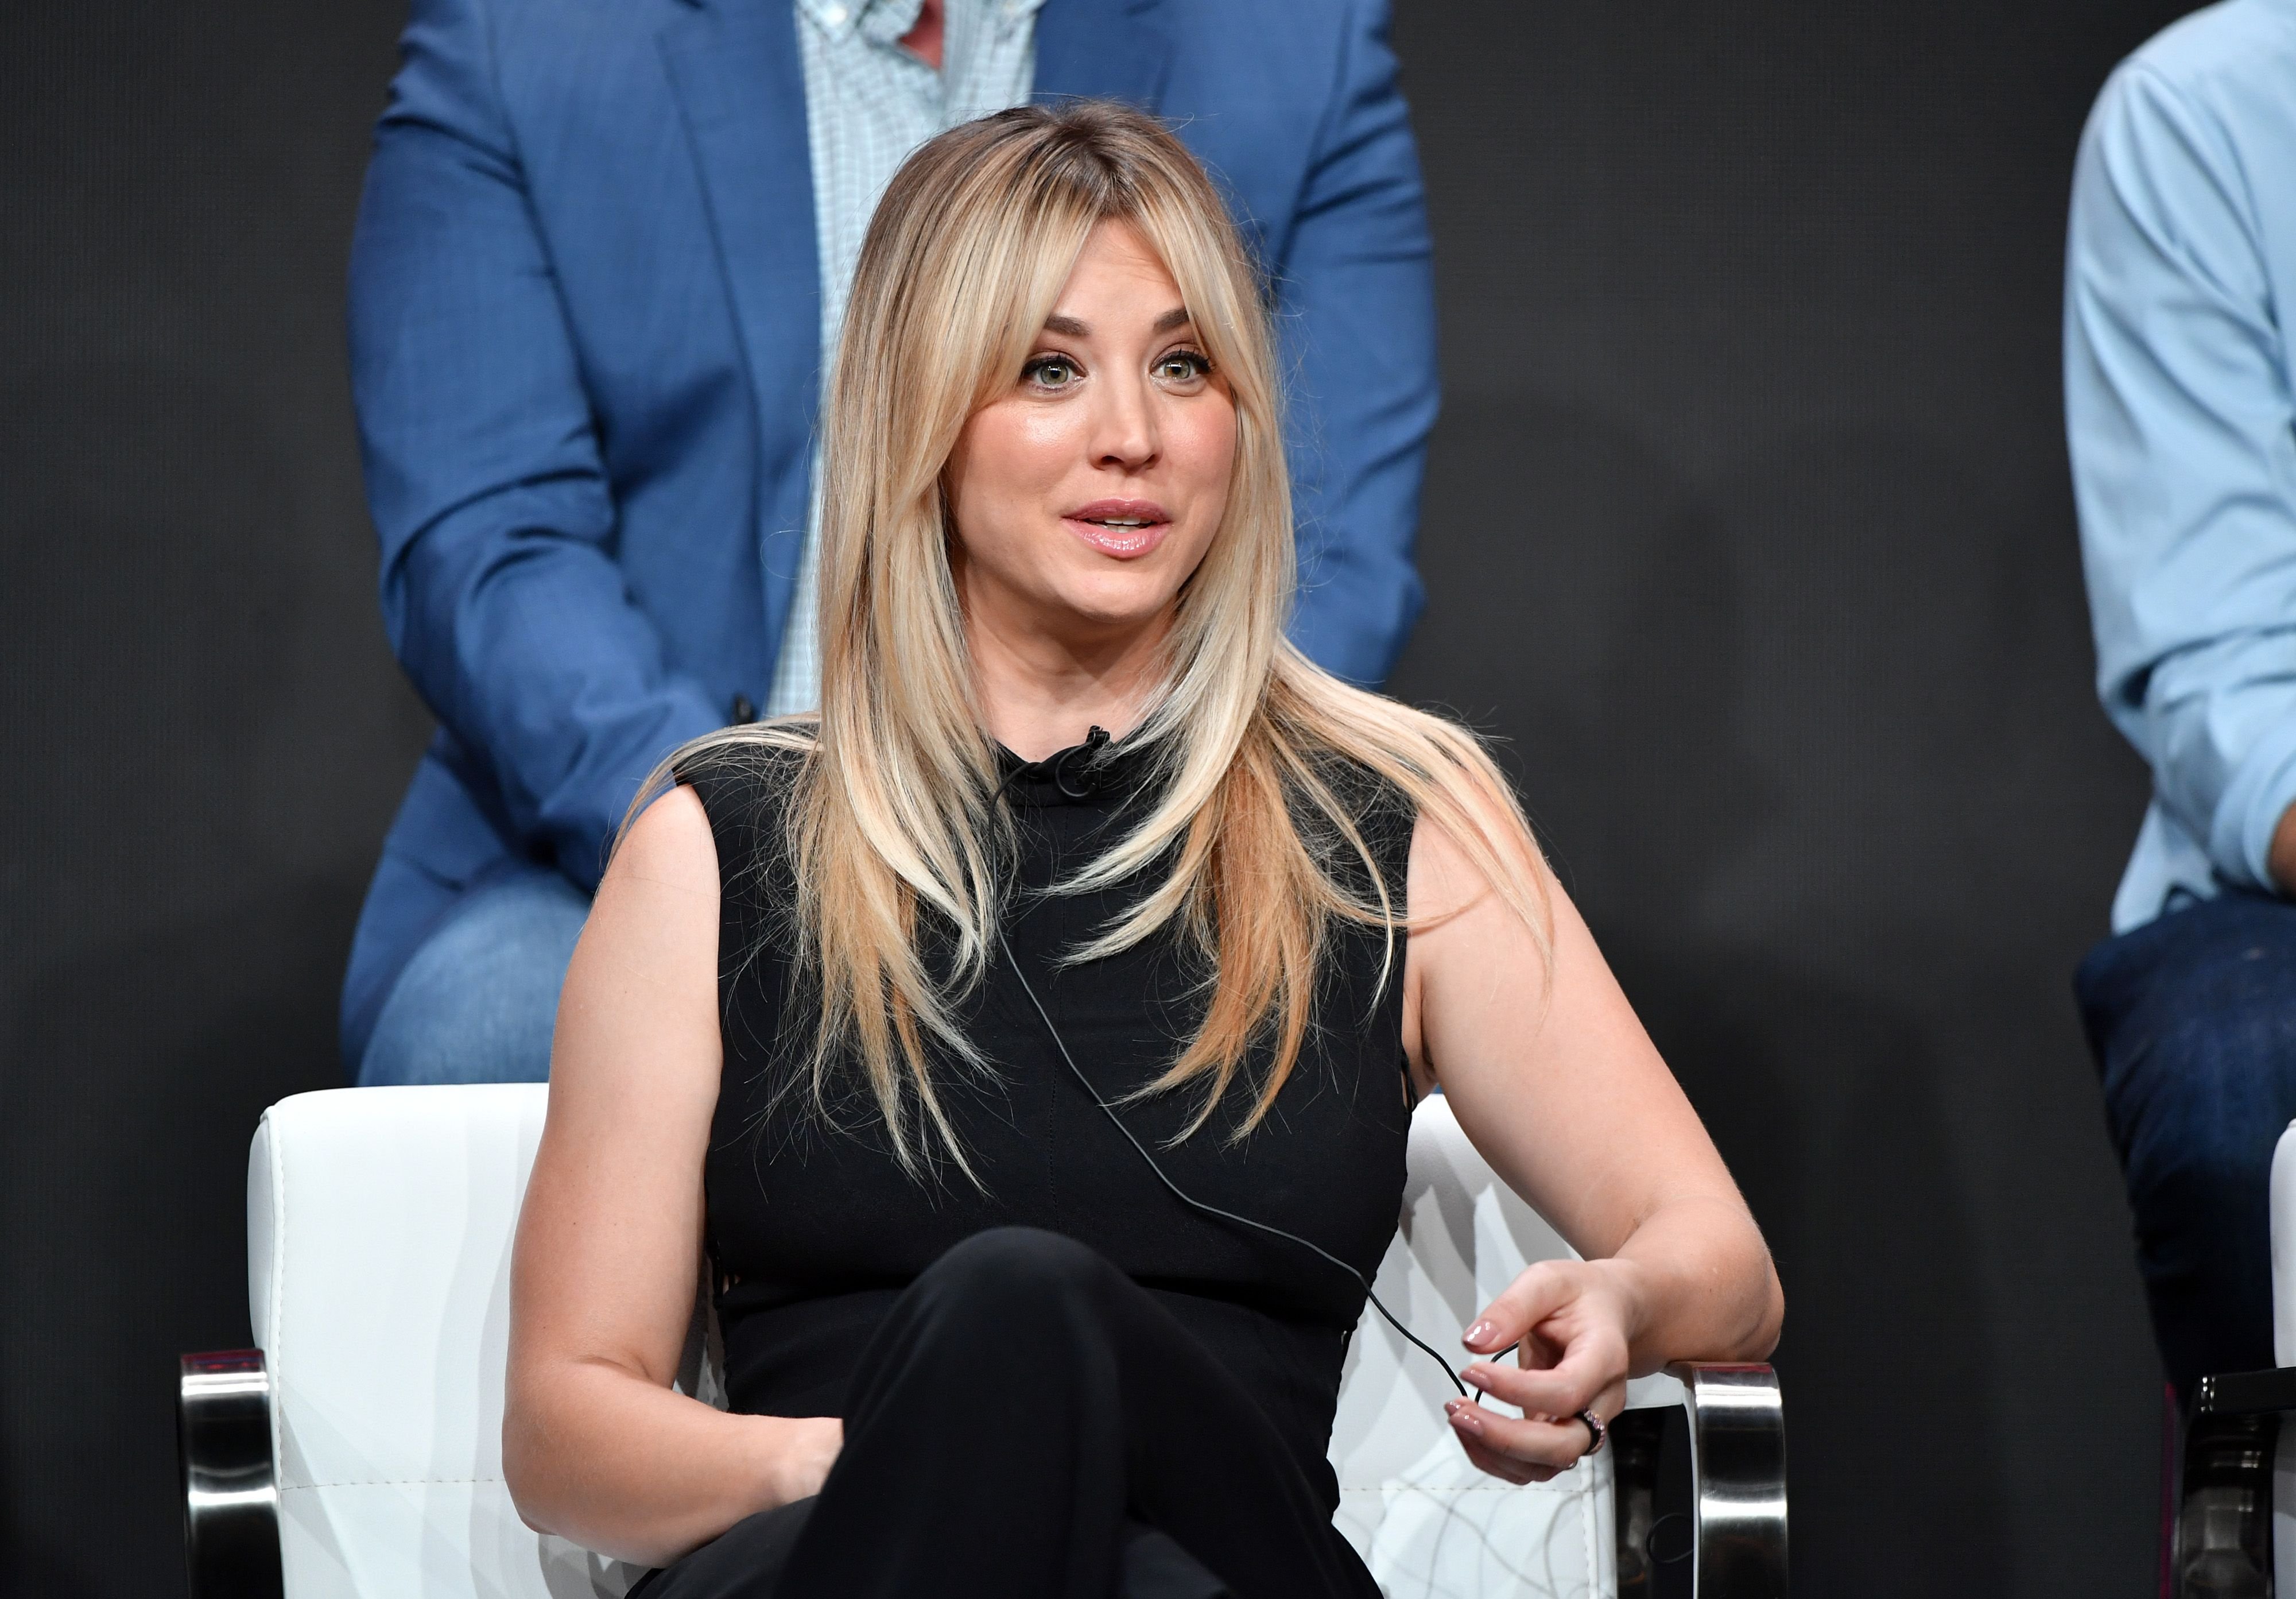 Kaley Cuoco at the DC Universe panel at the 2019 Summer TCA Press Tour on July 23, 2019 | Photo: Getty Images